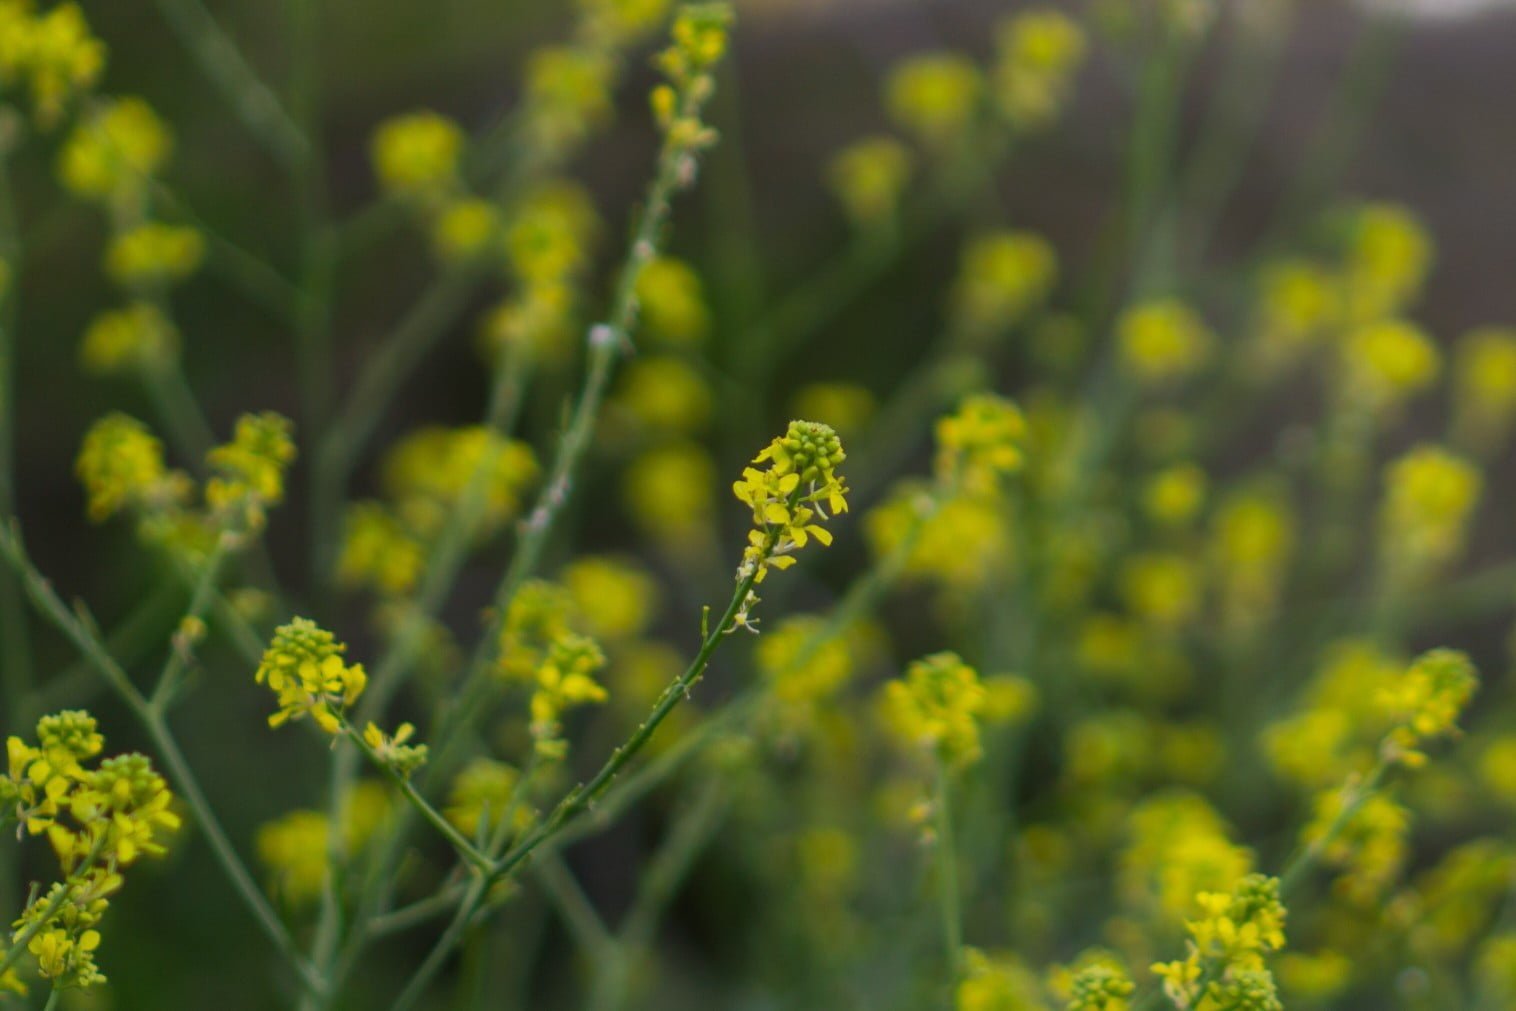 mustard plant t20 Zz14d0 Mustard-Based Fuel Could Reduce Aviation’s Carbon Footprint by 68%, Study Finds